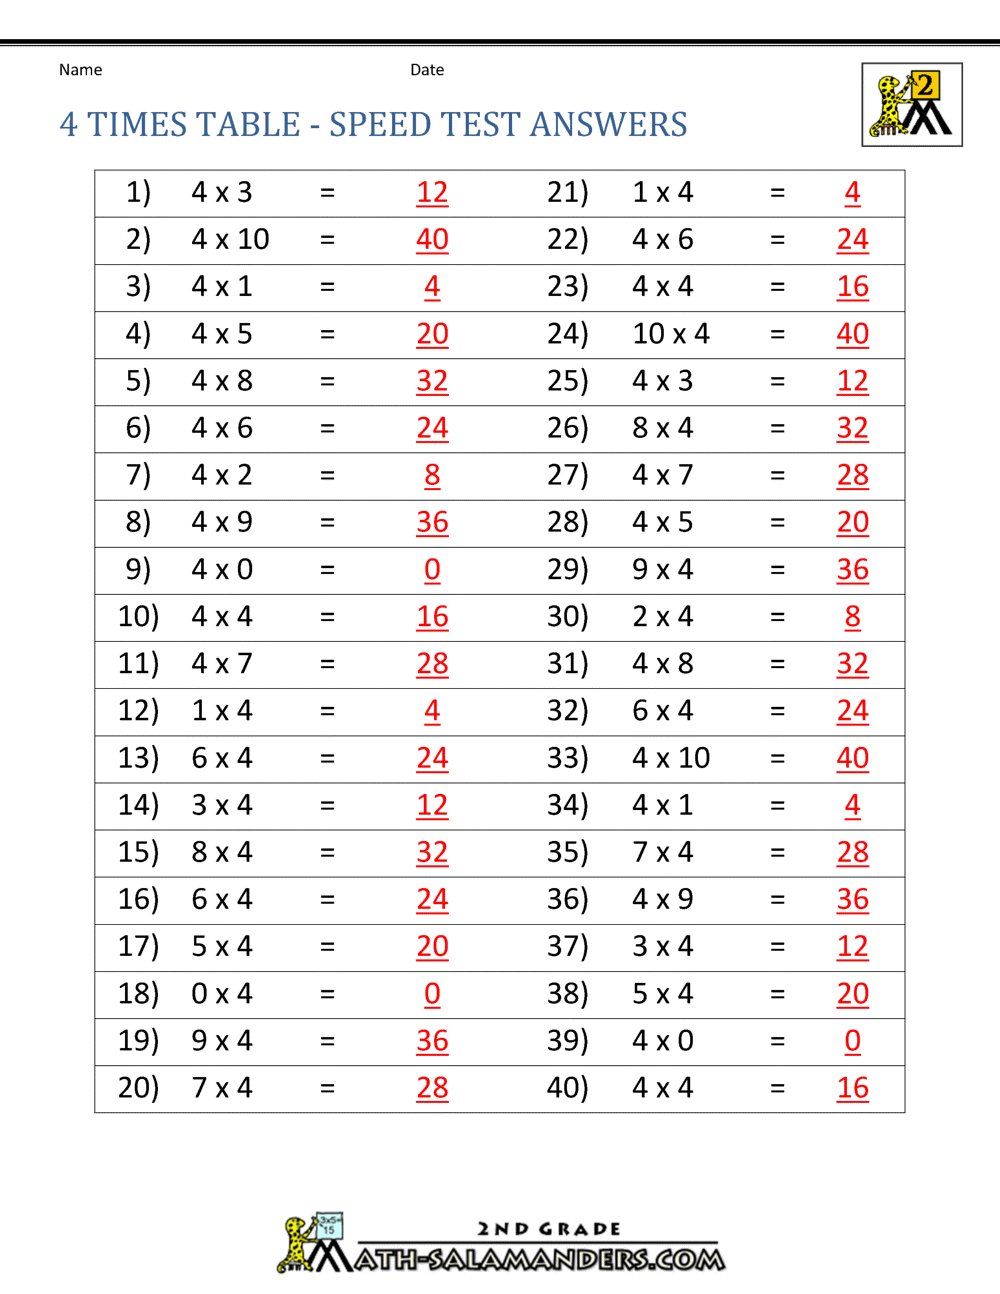 https://www.2nd-grade-math-salamanders.com/image-files/times-table-worksheets-4-times-table-speed-test-ans.gif